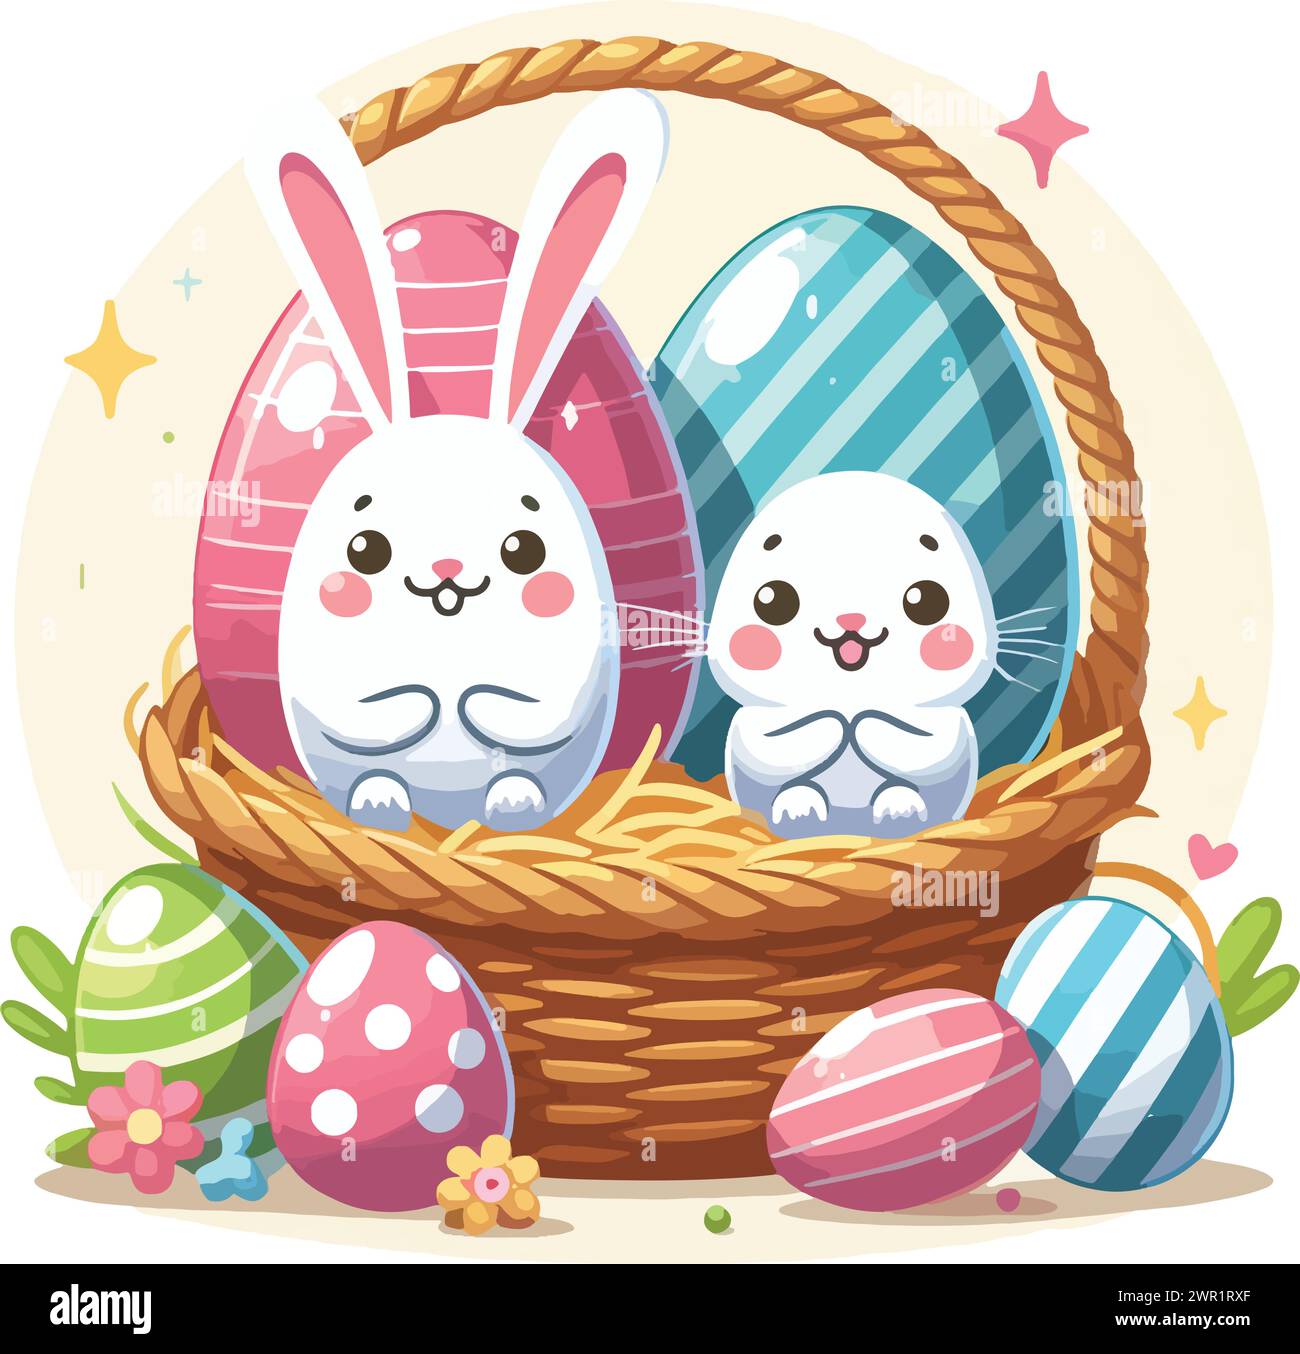 Hop into the Easter spirit with our charming Easter Rabbit with Egg in Basket Illustration. This delightful artwork captures the joy and wonder of the Stock Vector